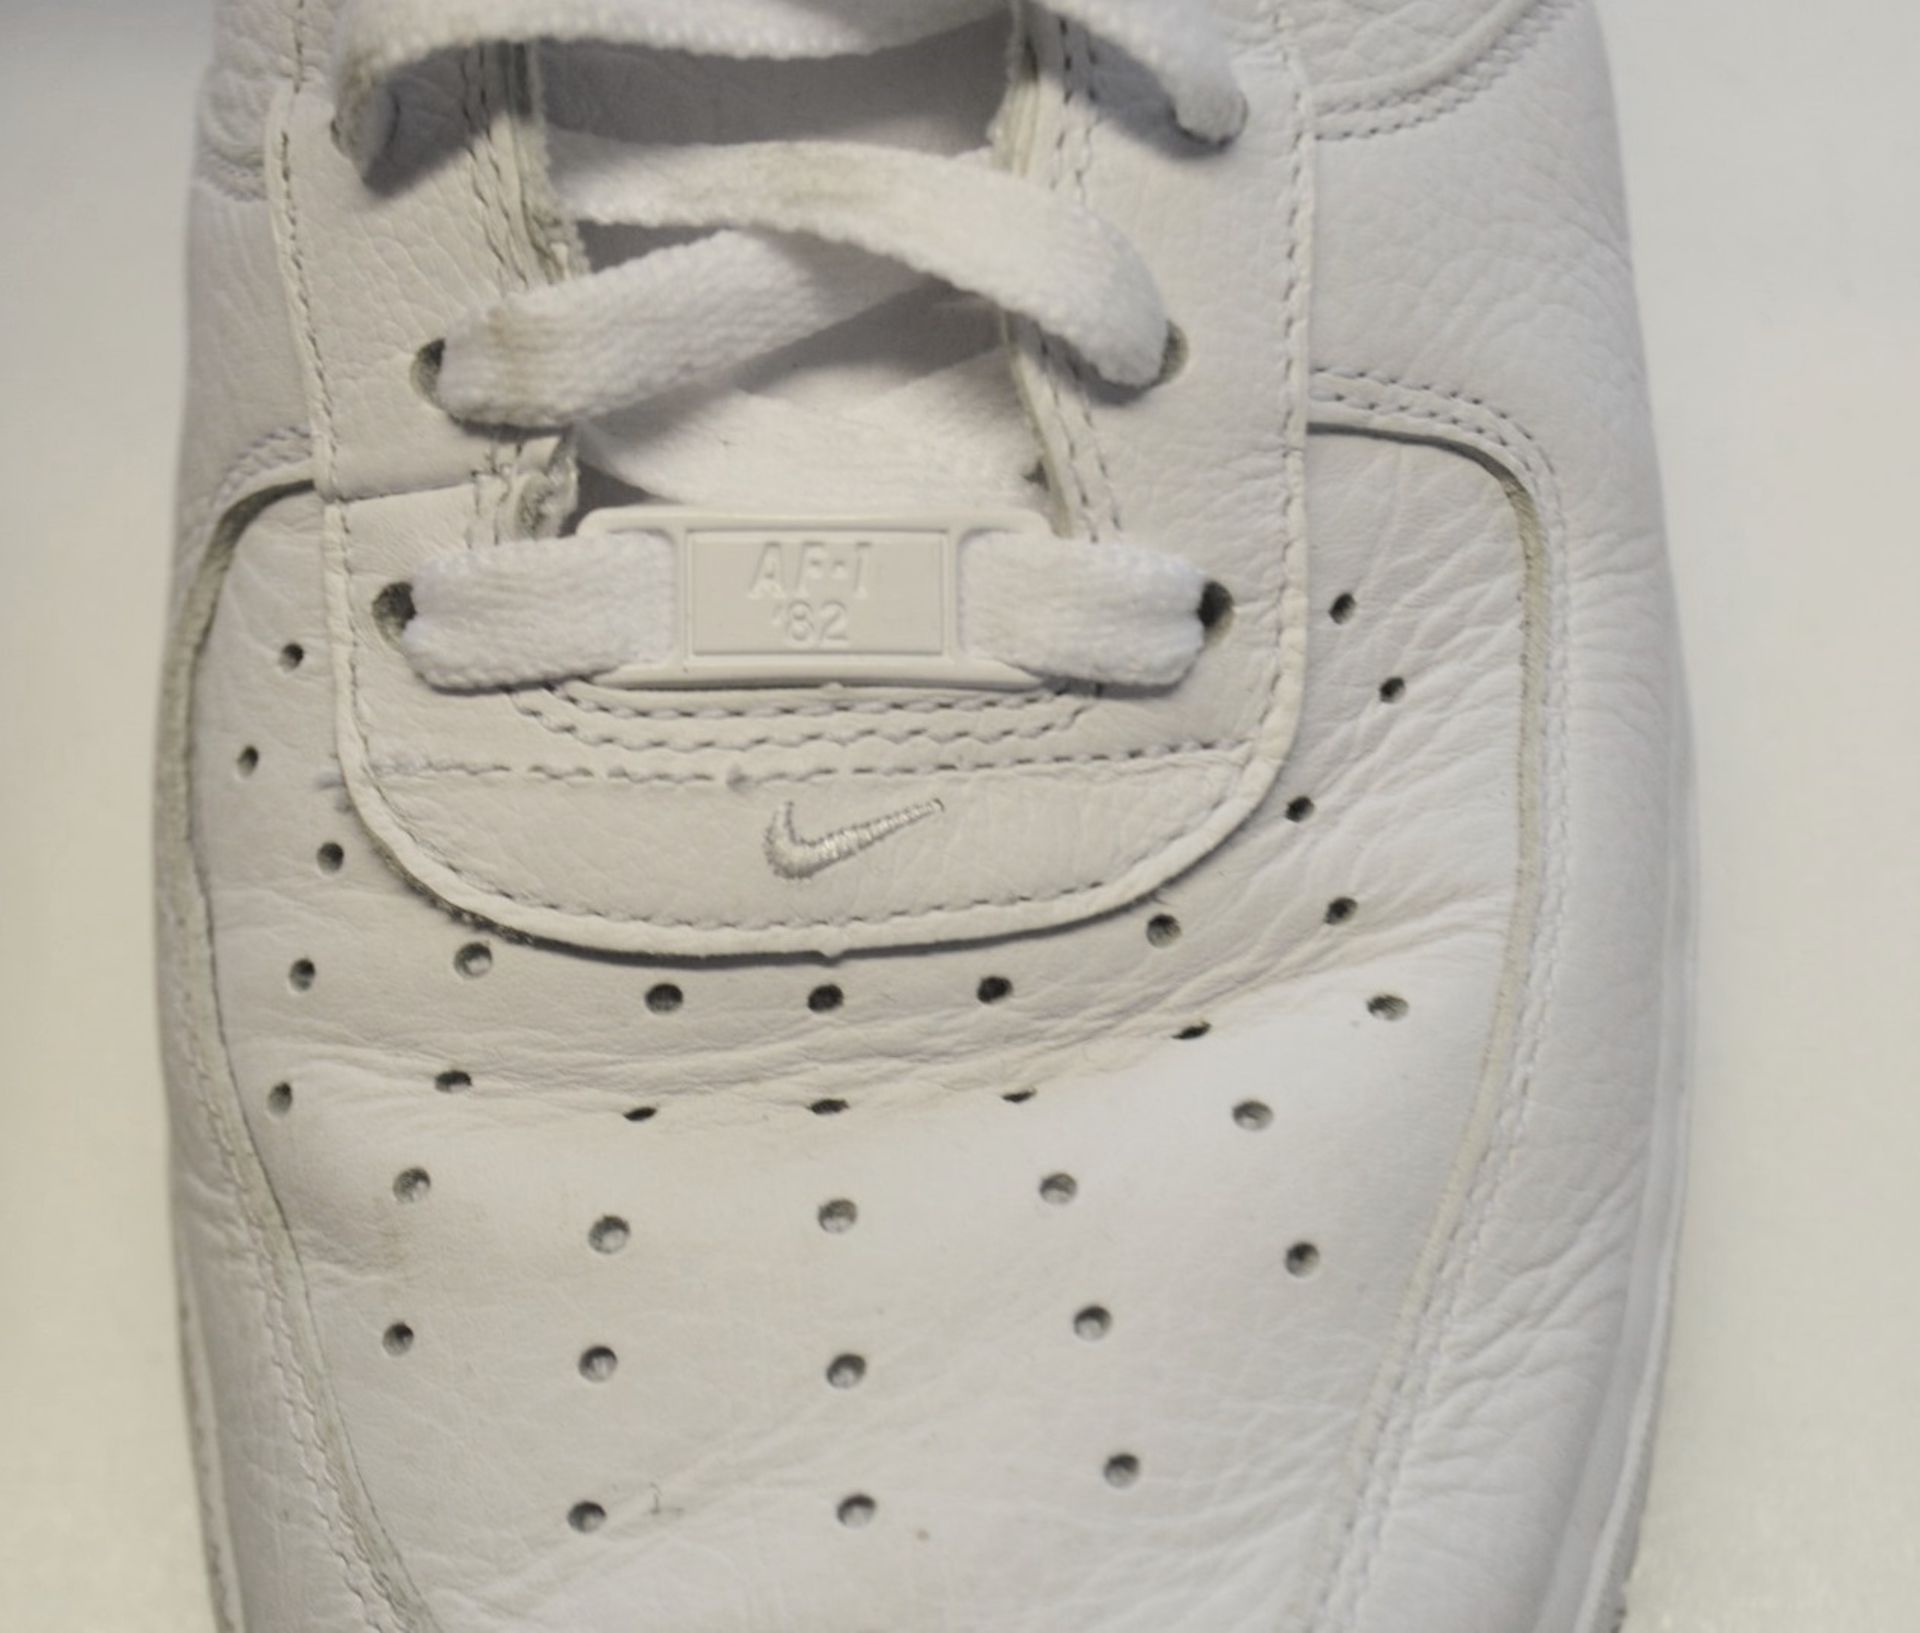 1 x Pair Of Men's Genuine Nike 'Air Force 1 Low' Trainers - Nikeconnect Nyc - Size (EU/UK): 45.5/ - Image 6 of 6